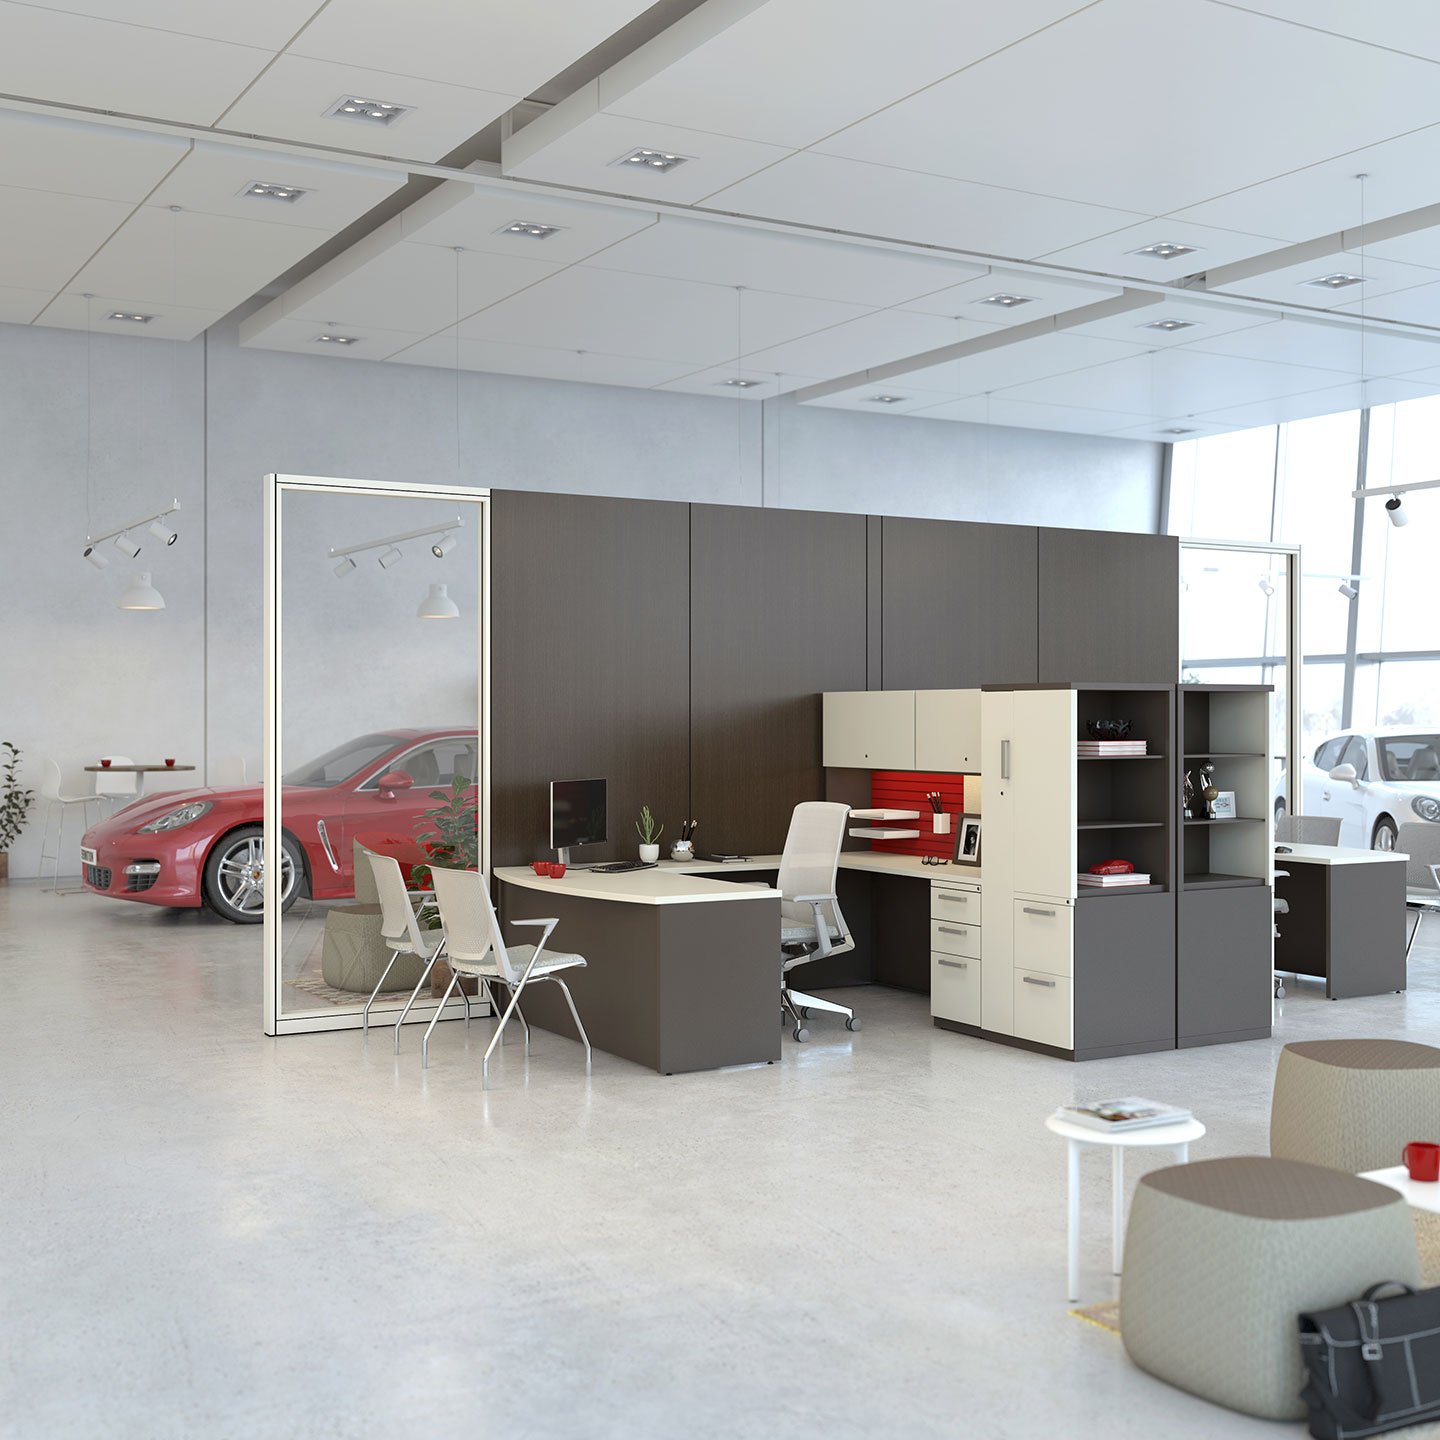 Haworth X Series Desk in dealship open office concept with cars and white desk with semi private wall dividing show room